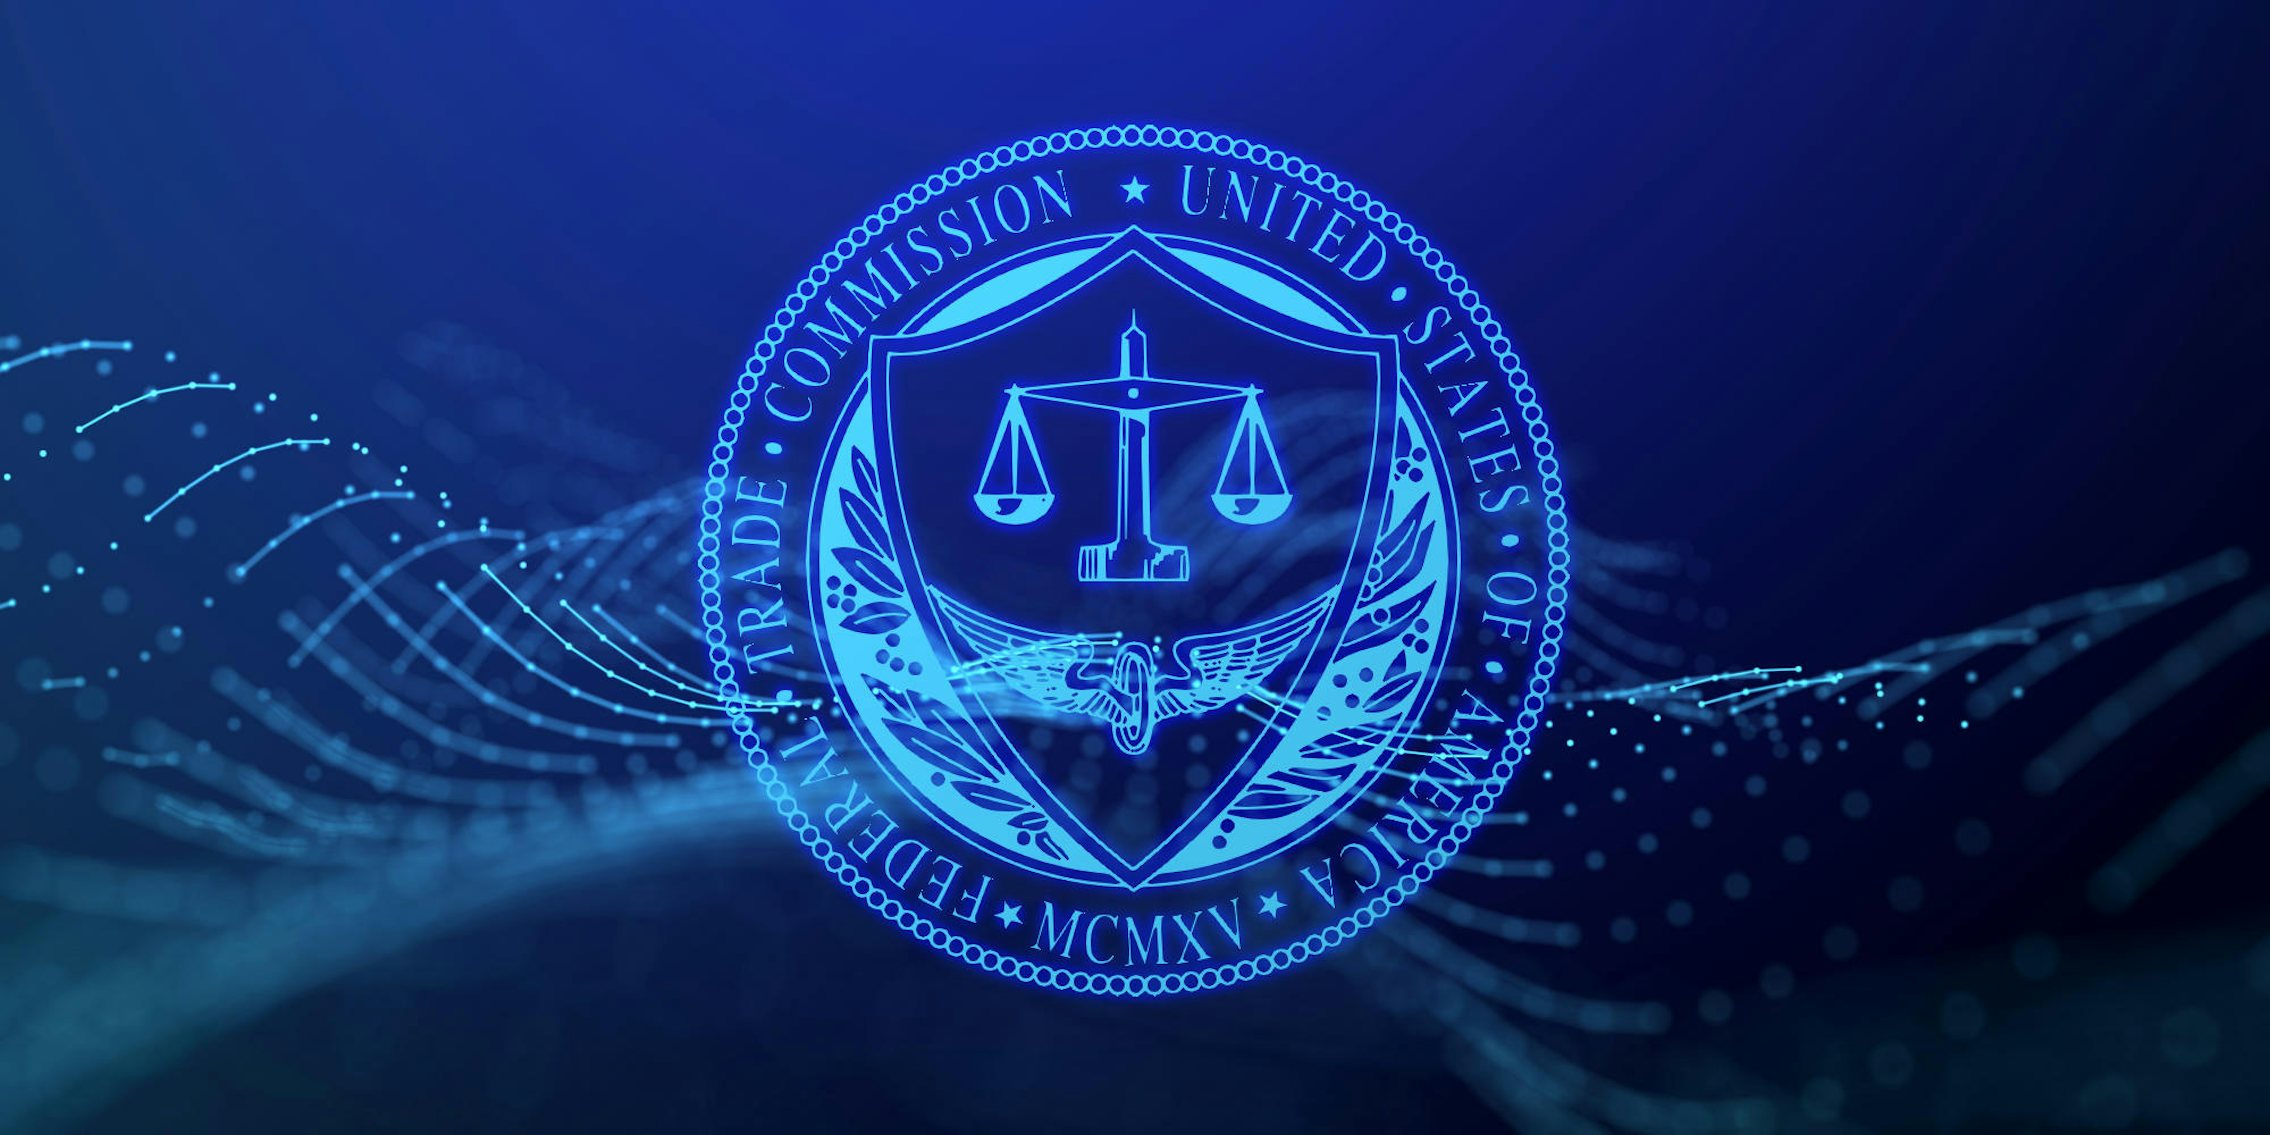 ftc logo in front of data wave